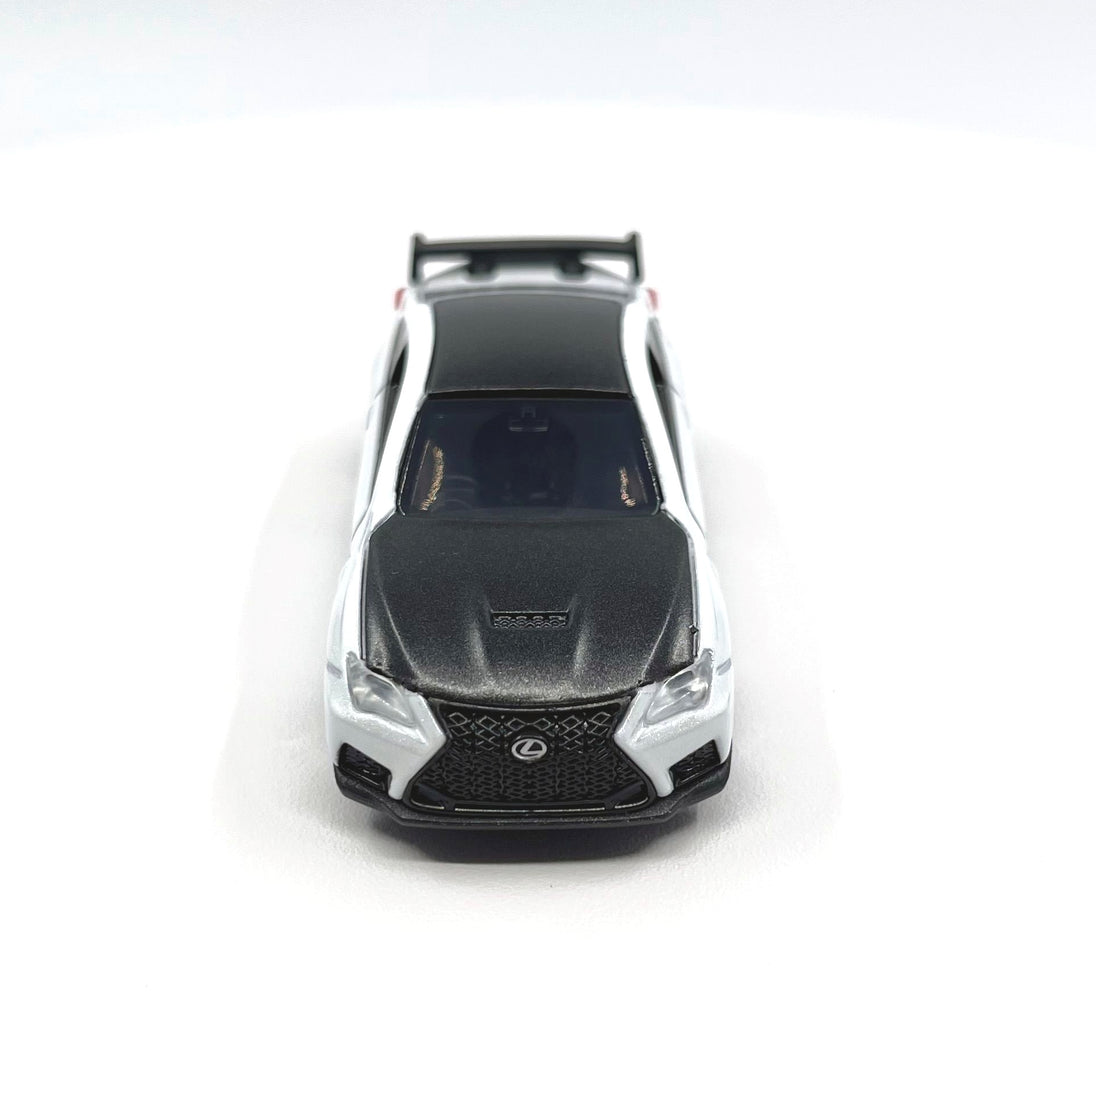 1:64 Lexus RC F Performance Package Alloy Tomica Diecast Car Model by Takara Tomy